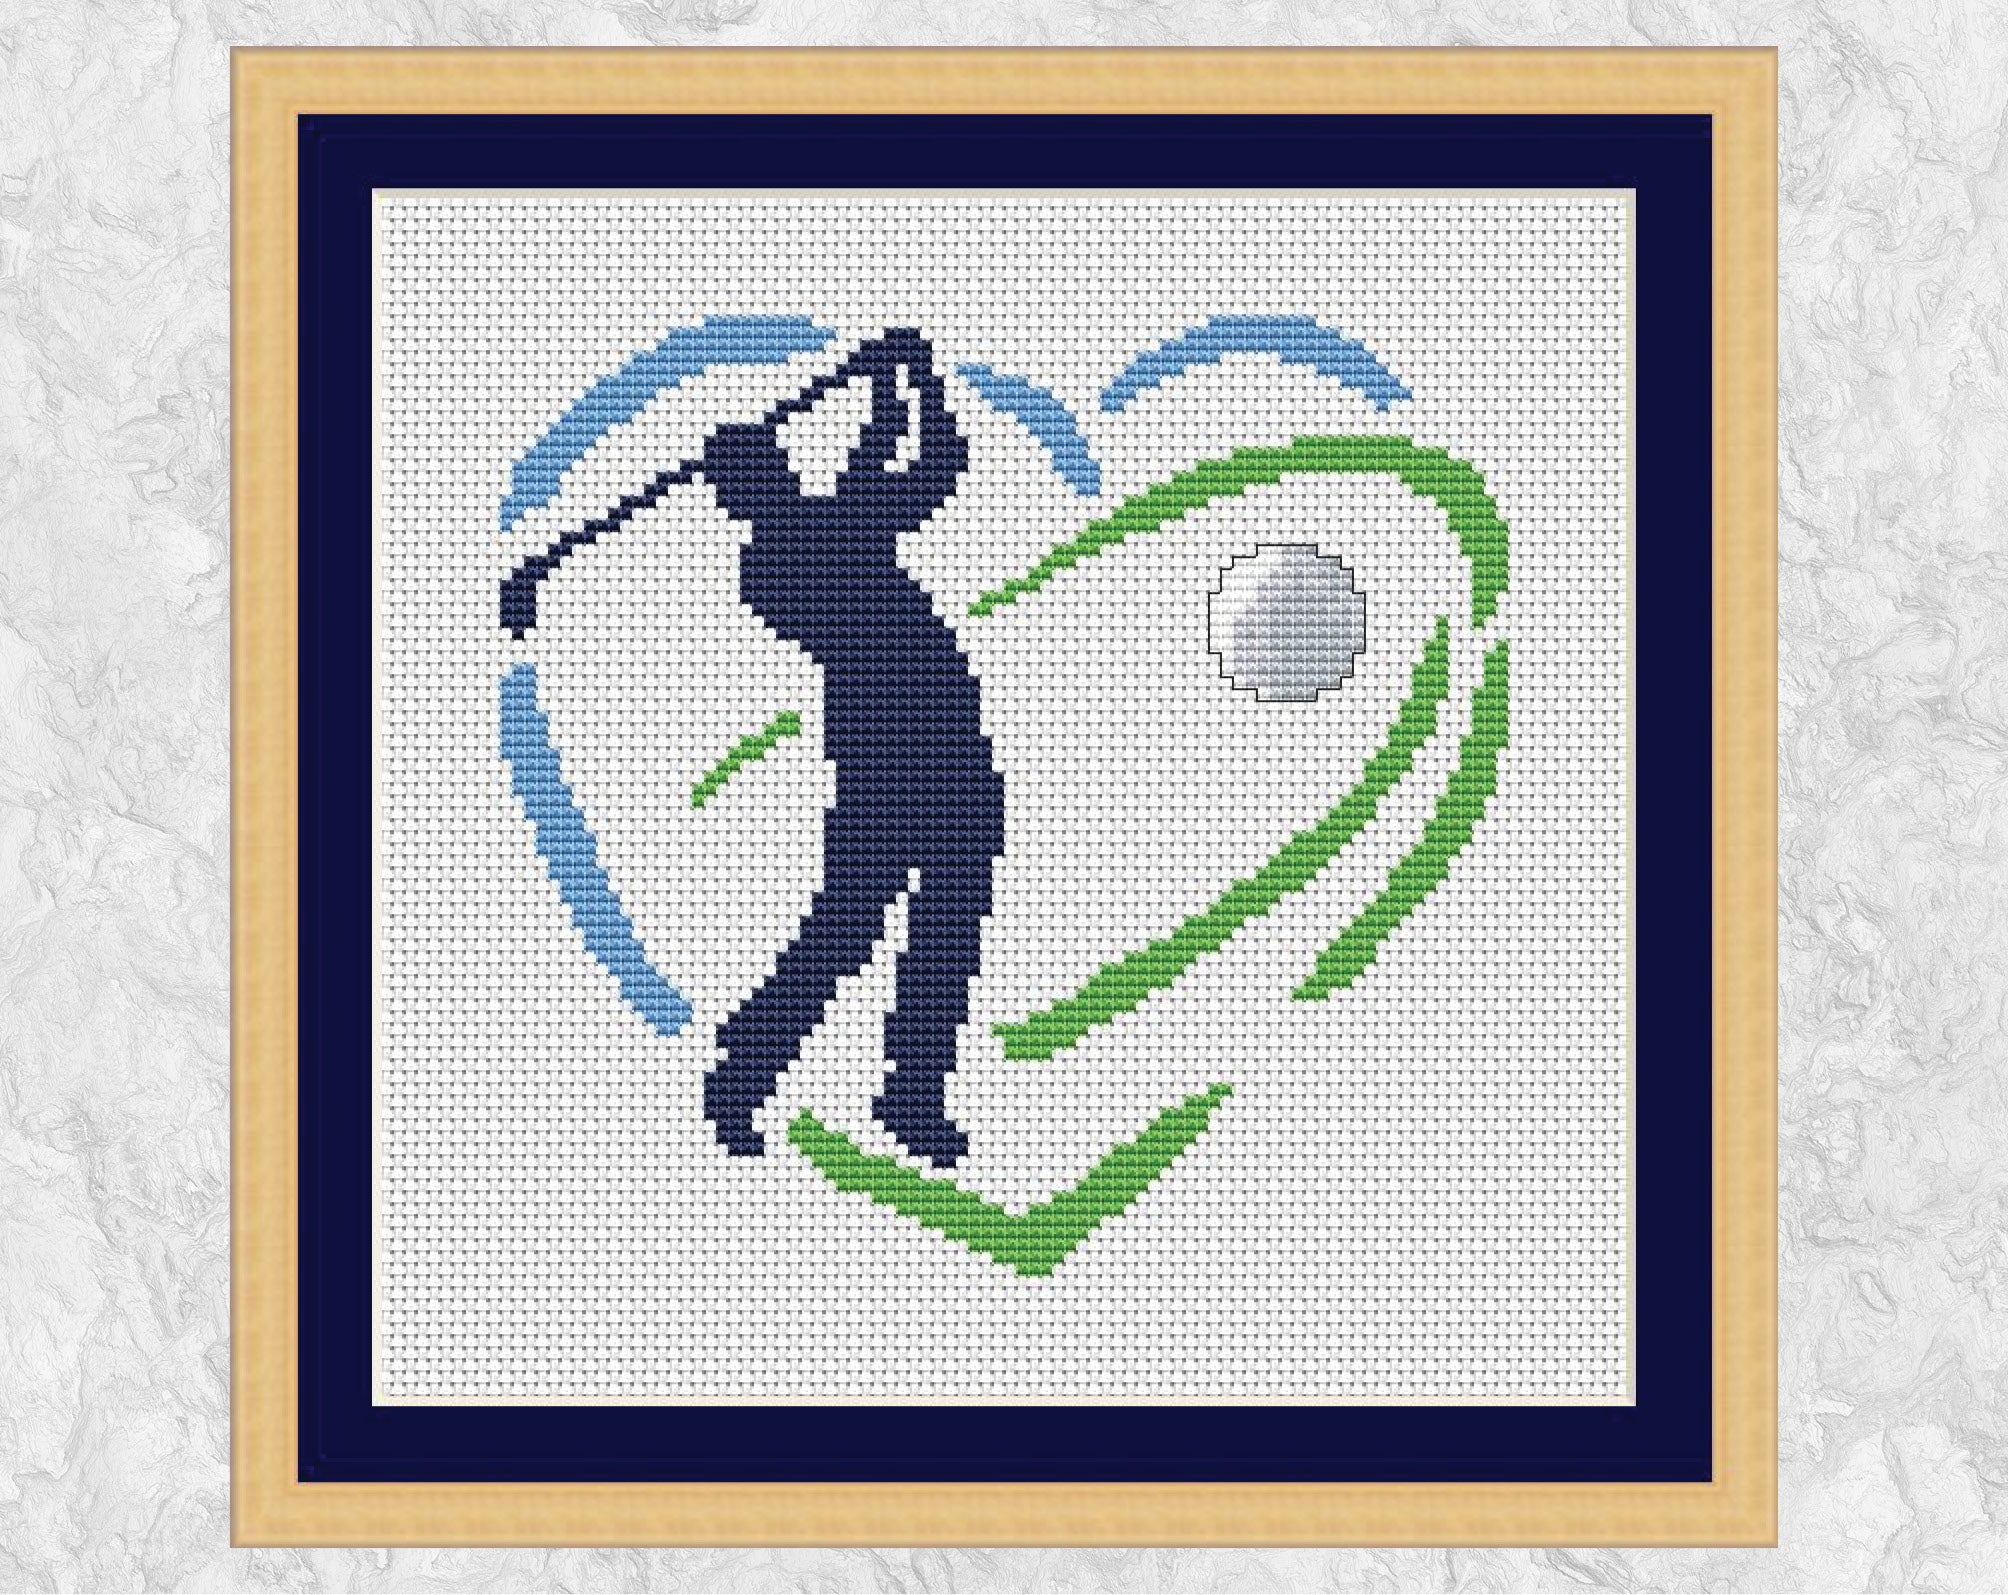 Golf Heart cross stitch pattern - silhouette of a golfer hitting a golf ball within a blue and green heart shape. Shown with frame.